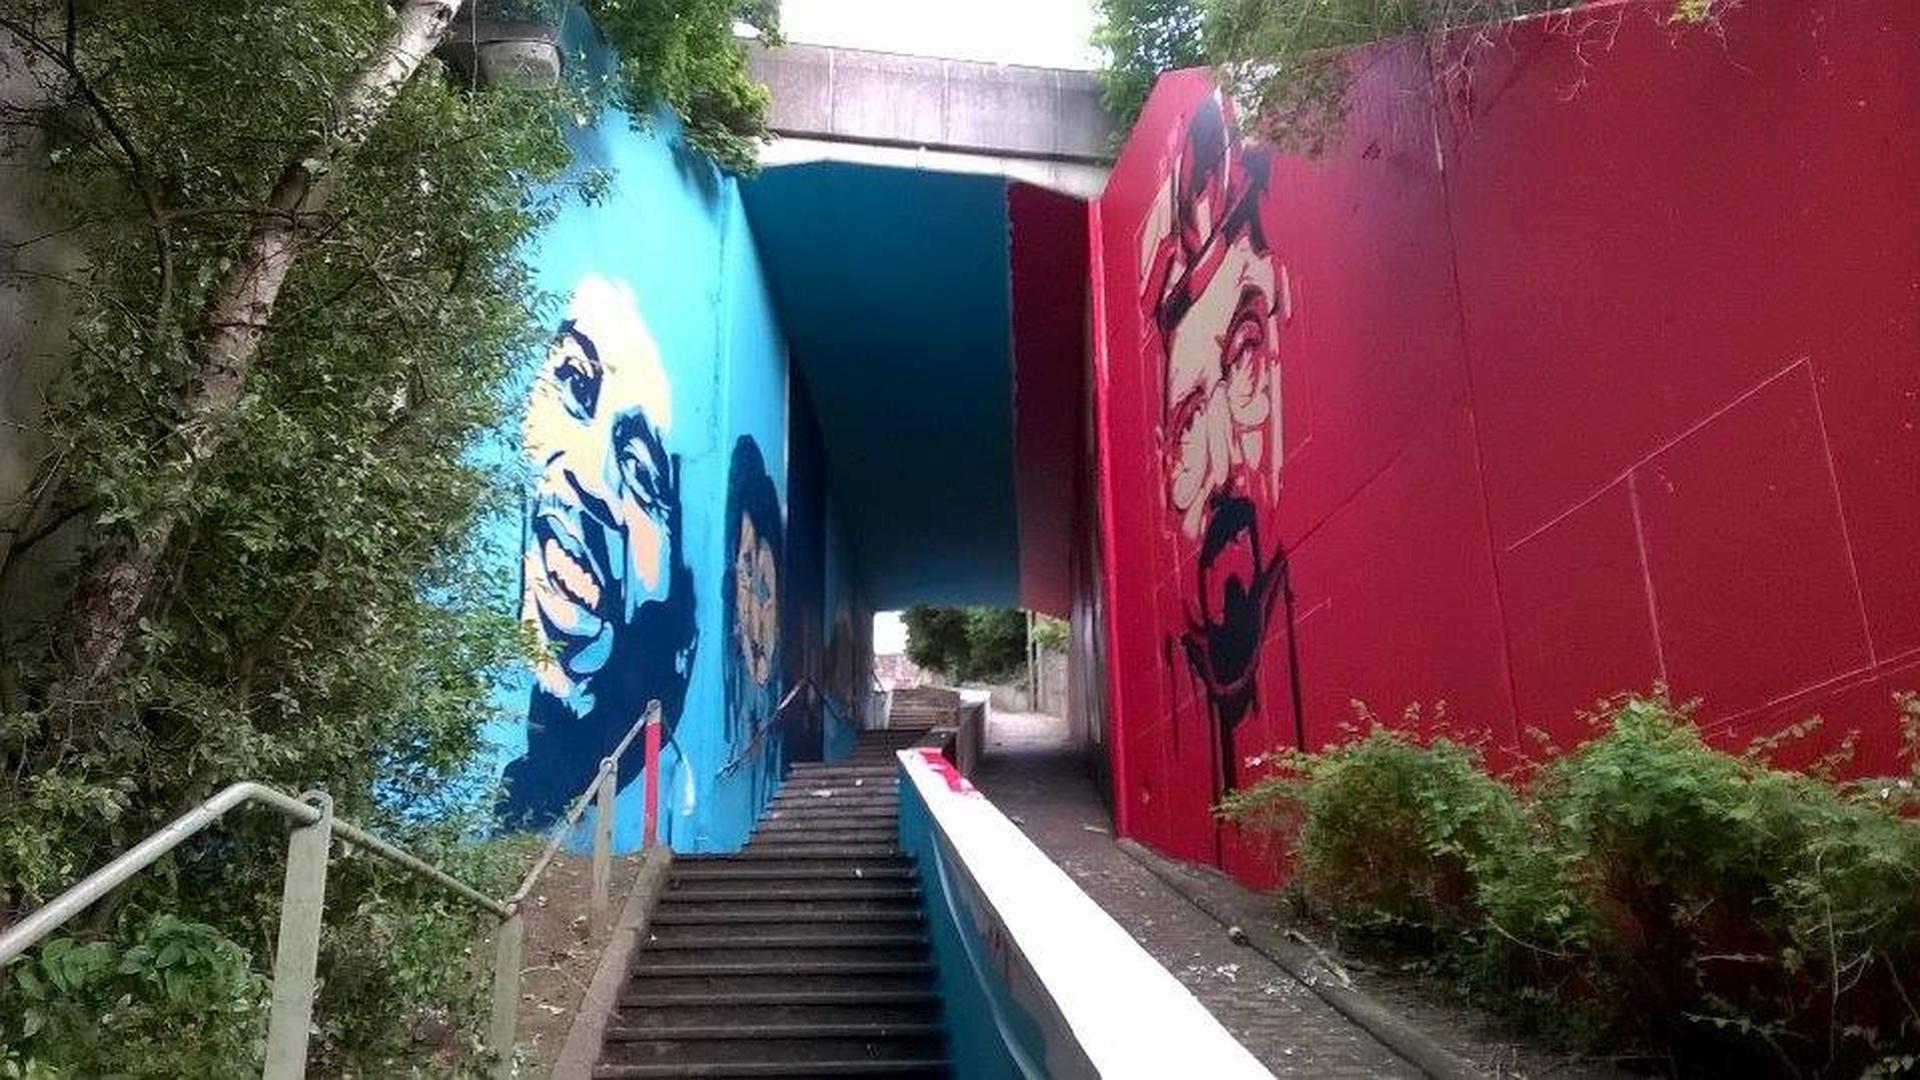 What started as rebellion is now seen as art, but where can you take in the street murals in Luxembourg?